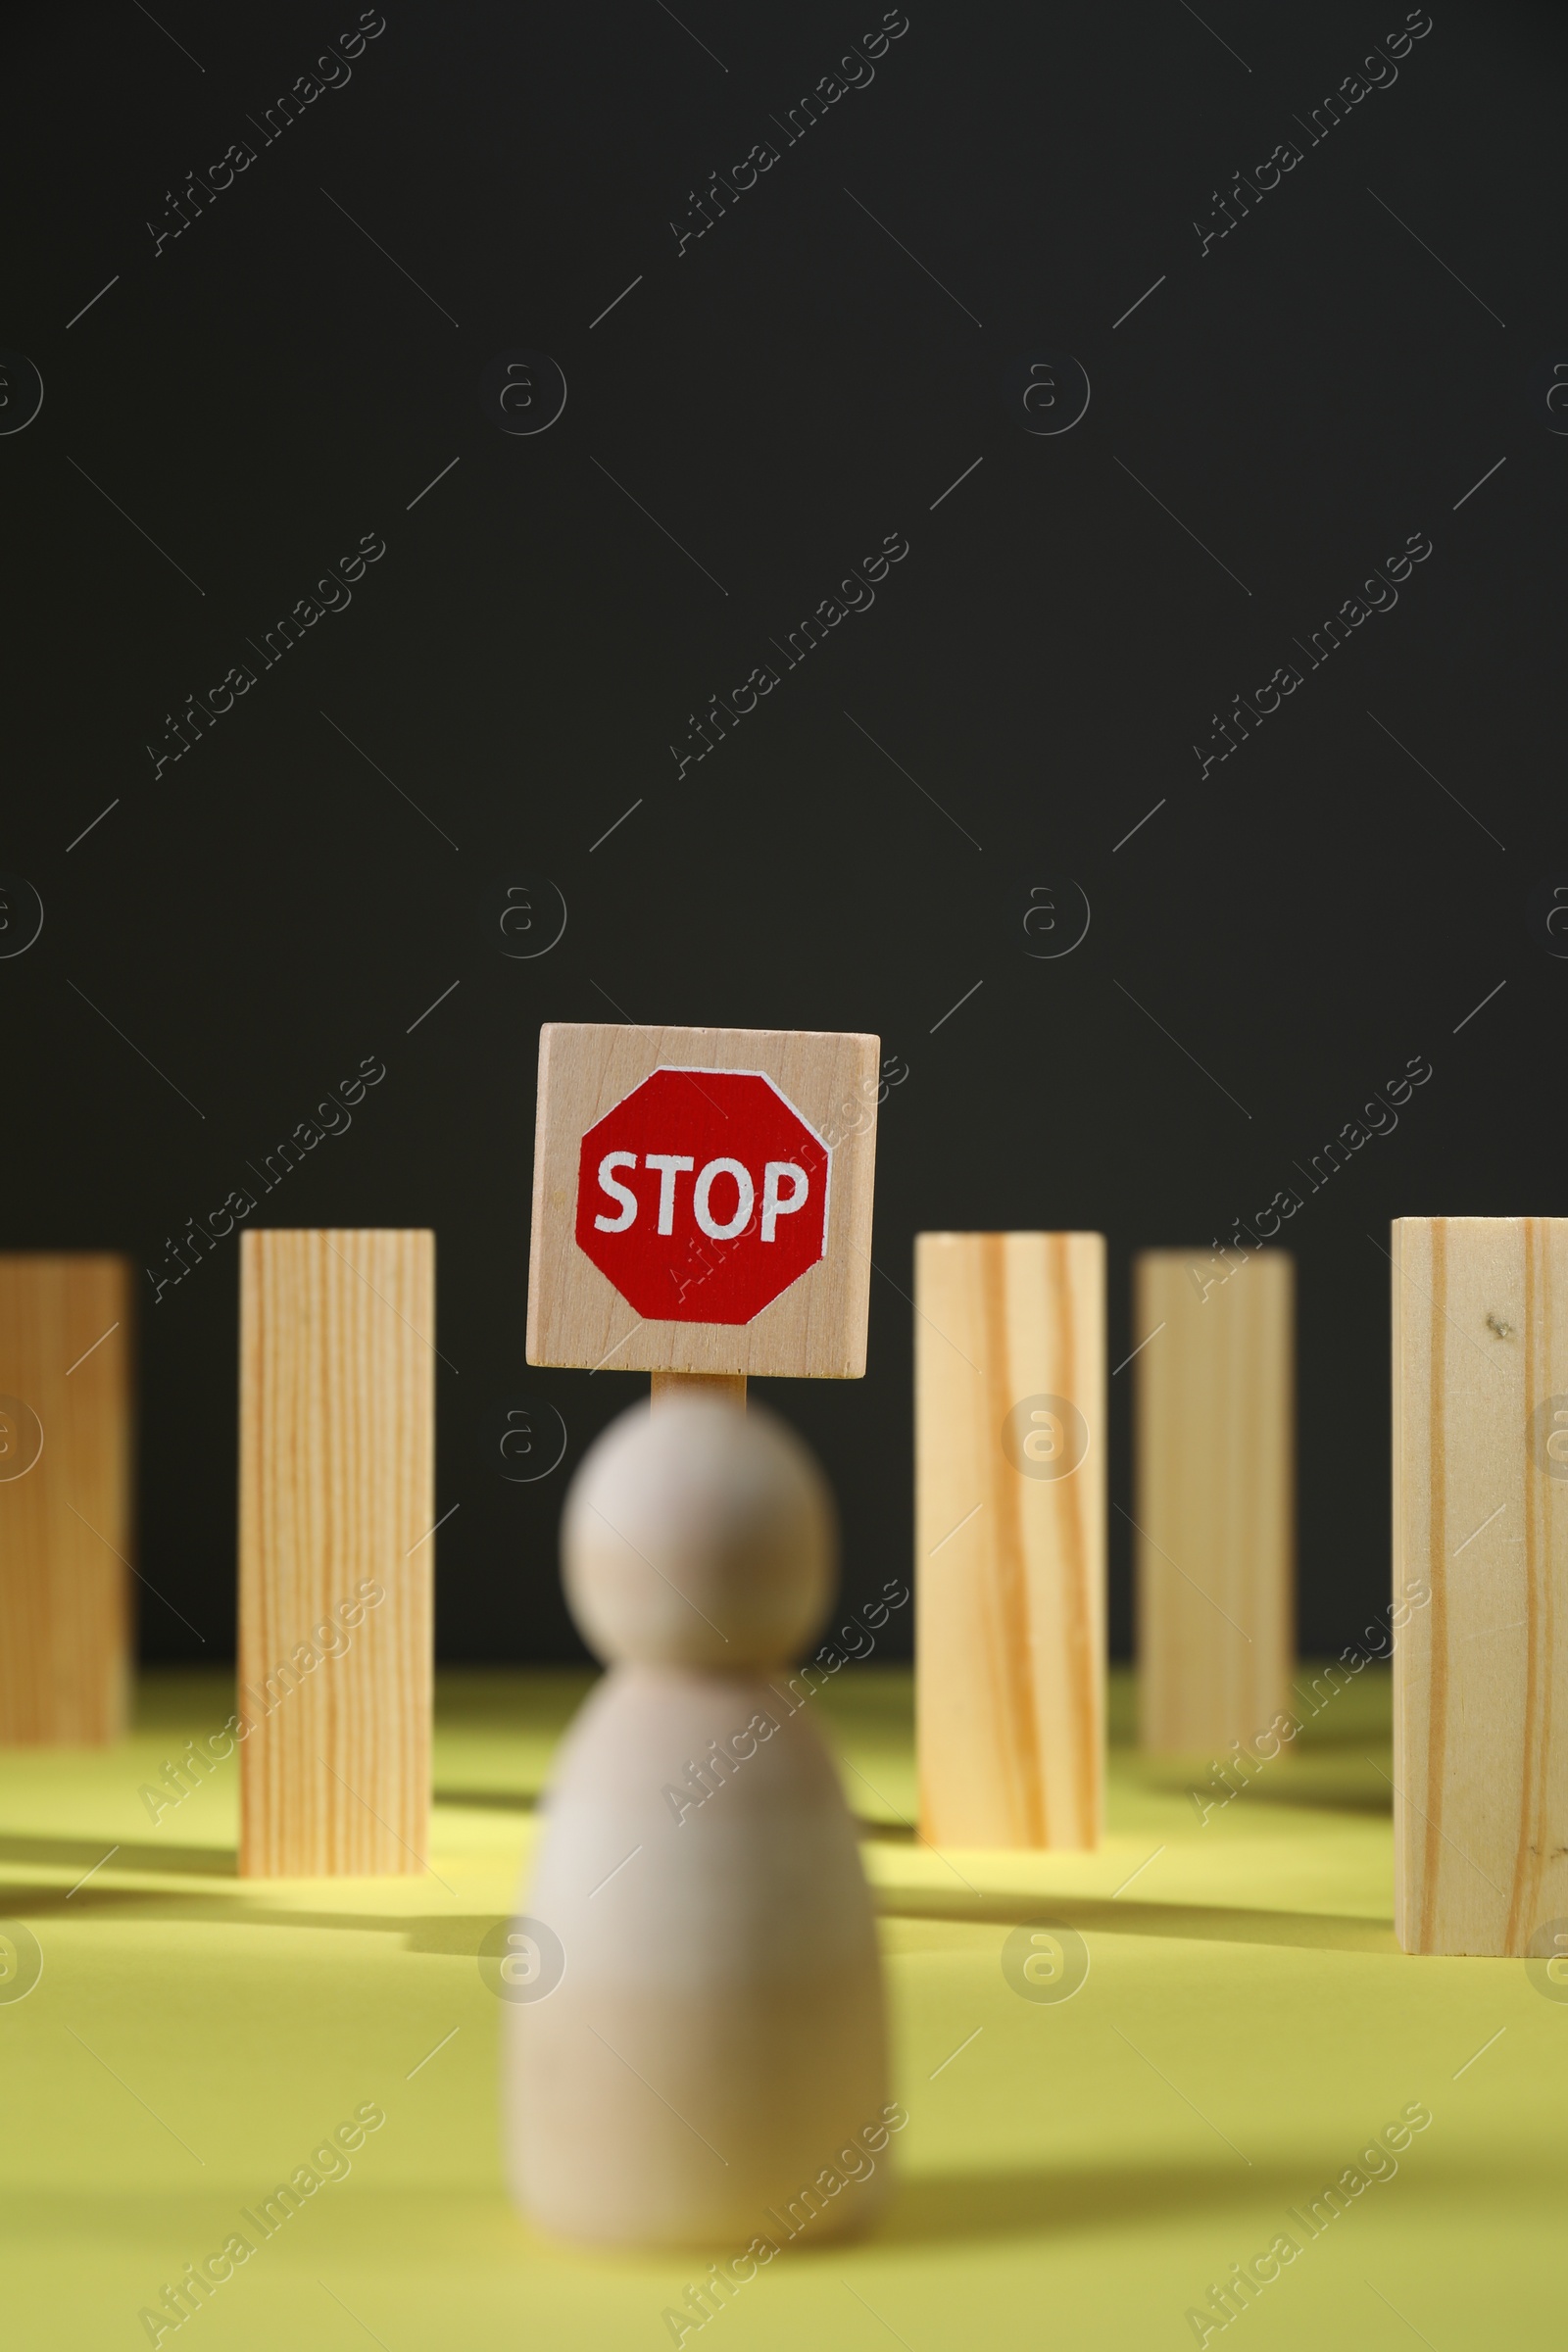 Photo of Road Stop sign and blocks as barriers blocking way for wooden human figure on yellow surface. Development through obstacles overcoming